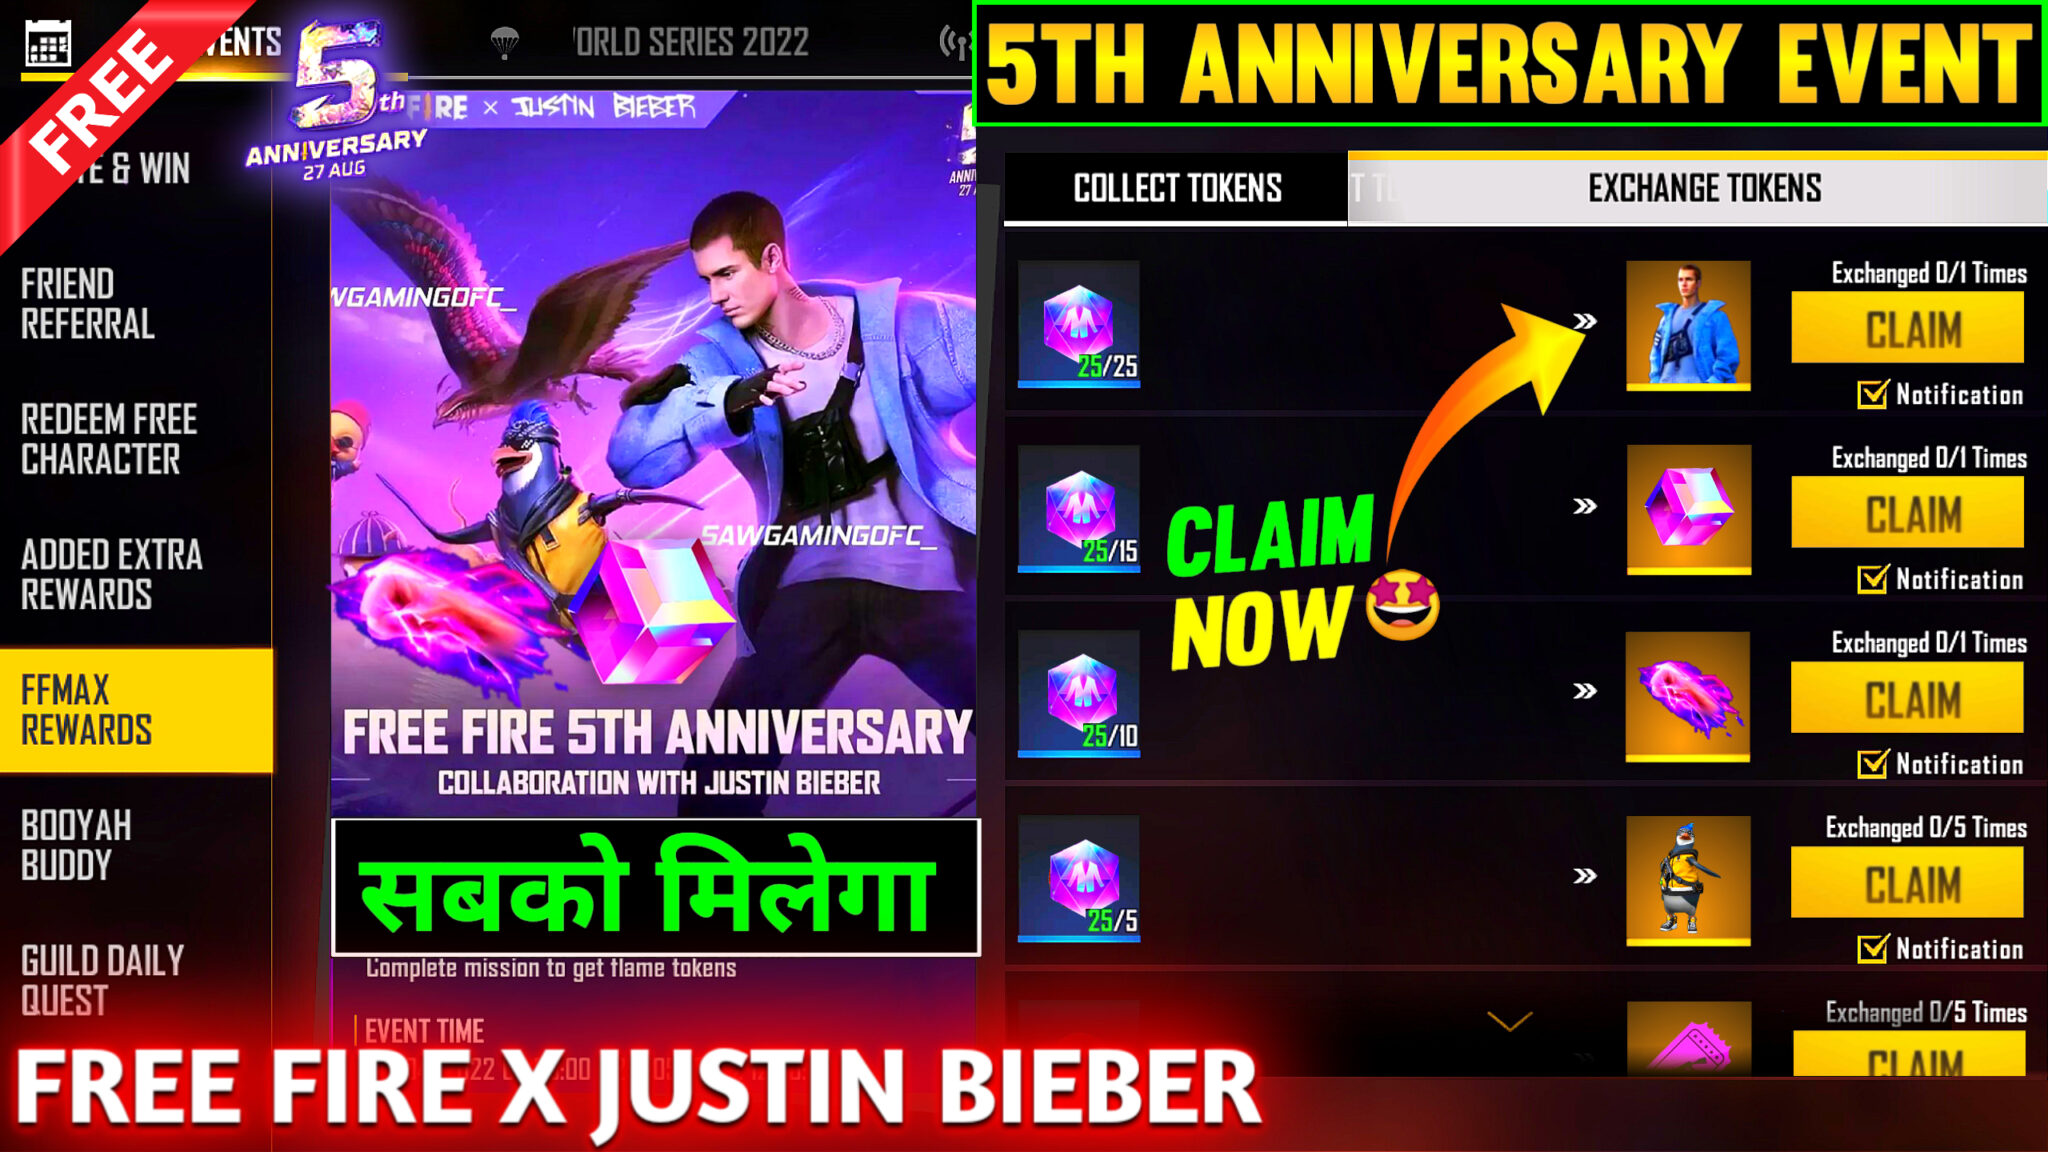 FREE FIRE ANNOUNCES NEW COLLABORATION WITH JUSTIN BIEBER